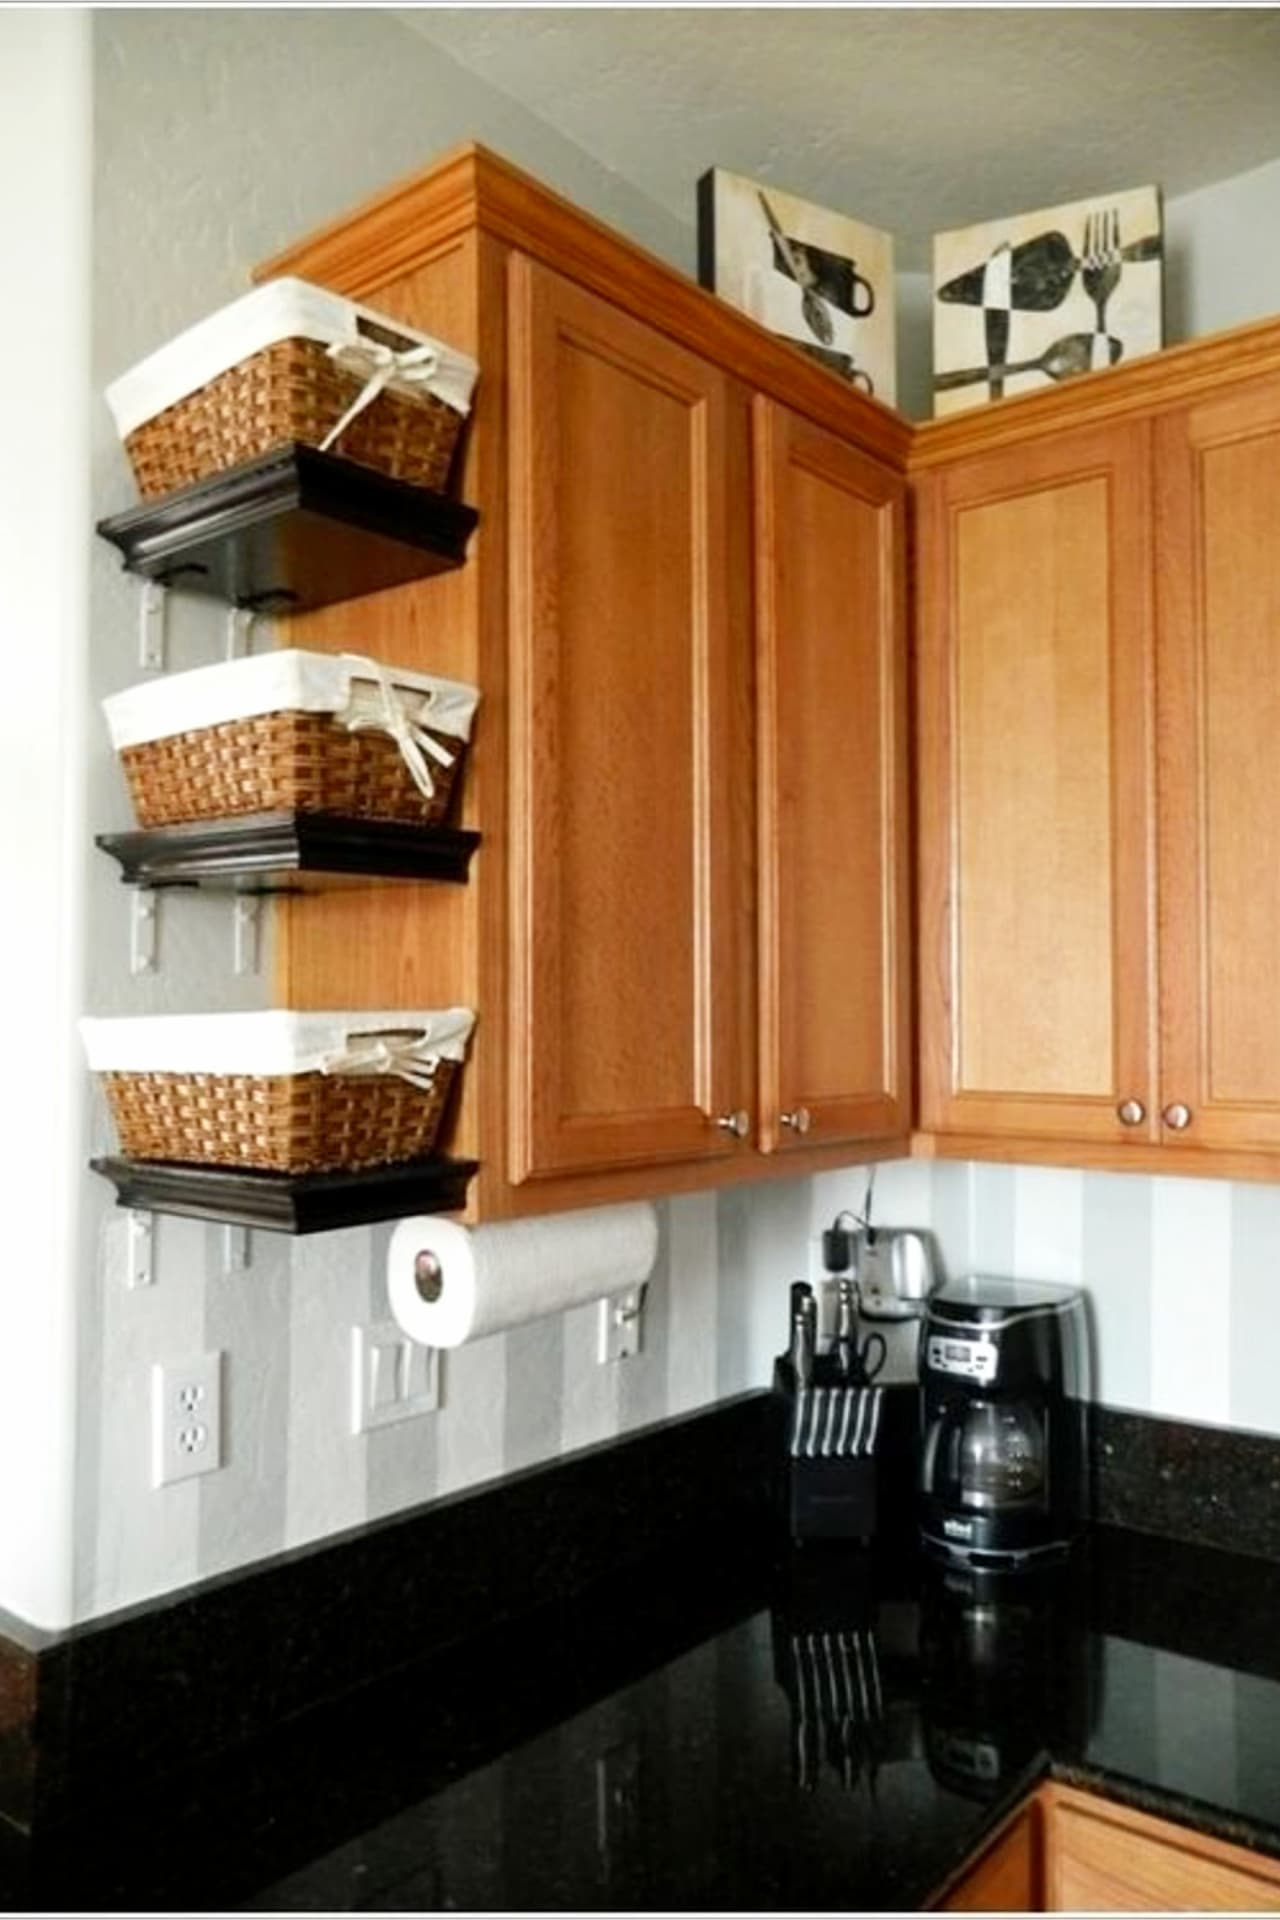 Declutter Your Kitchen Diy Shelves To Organize A Country